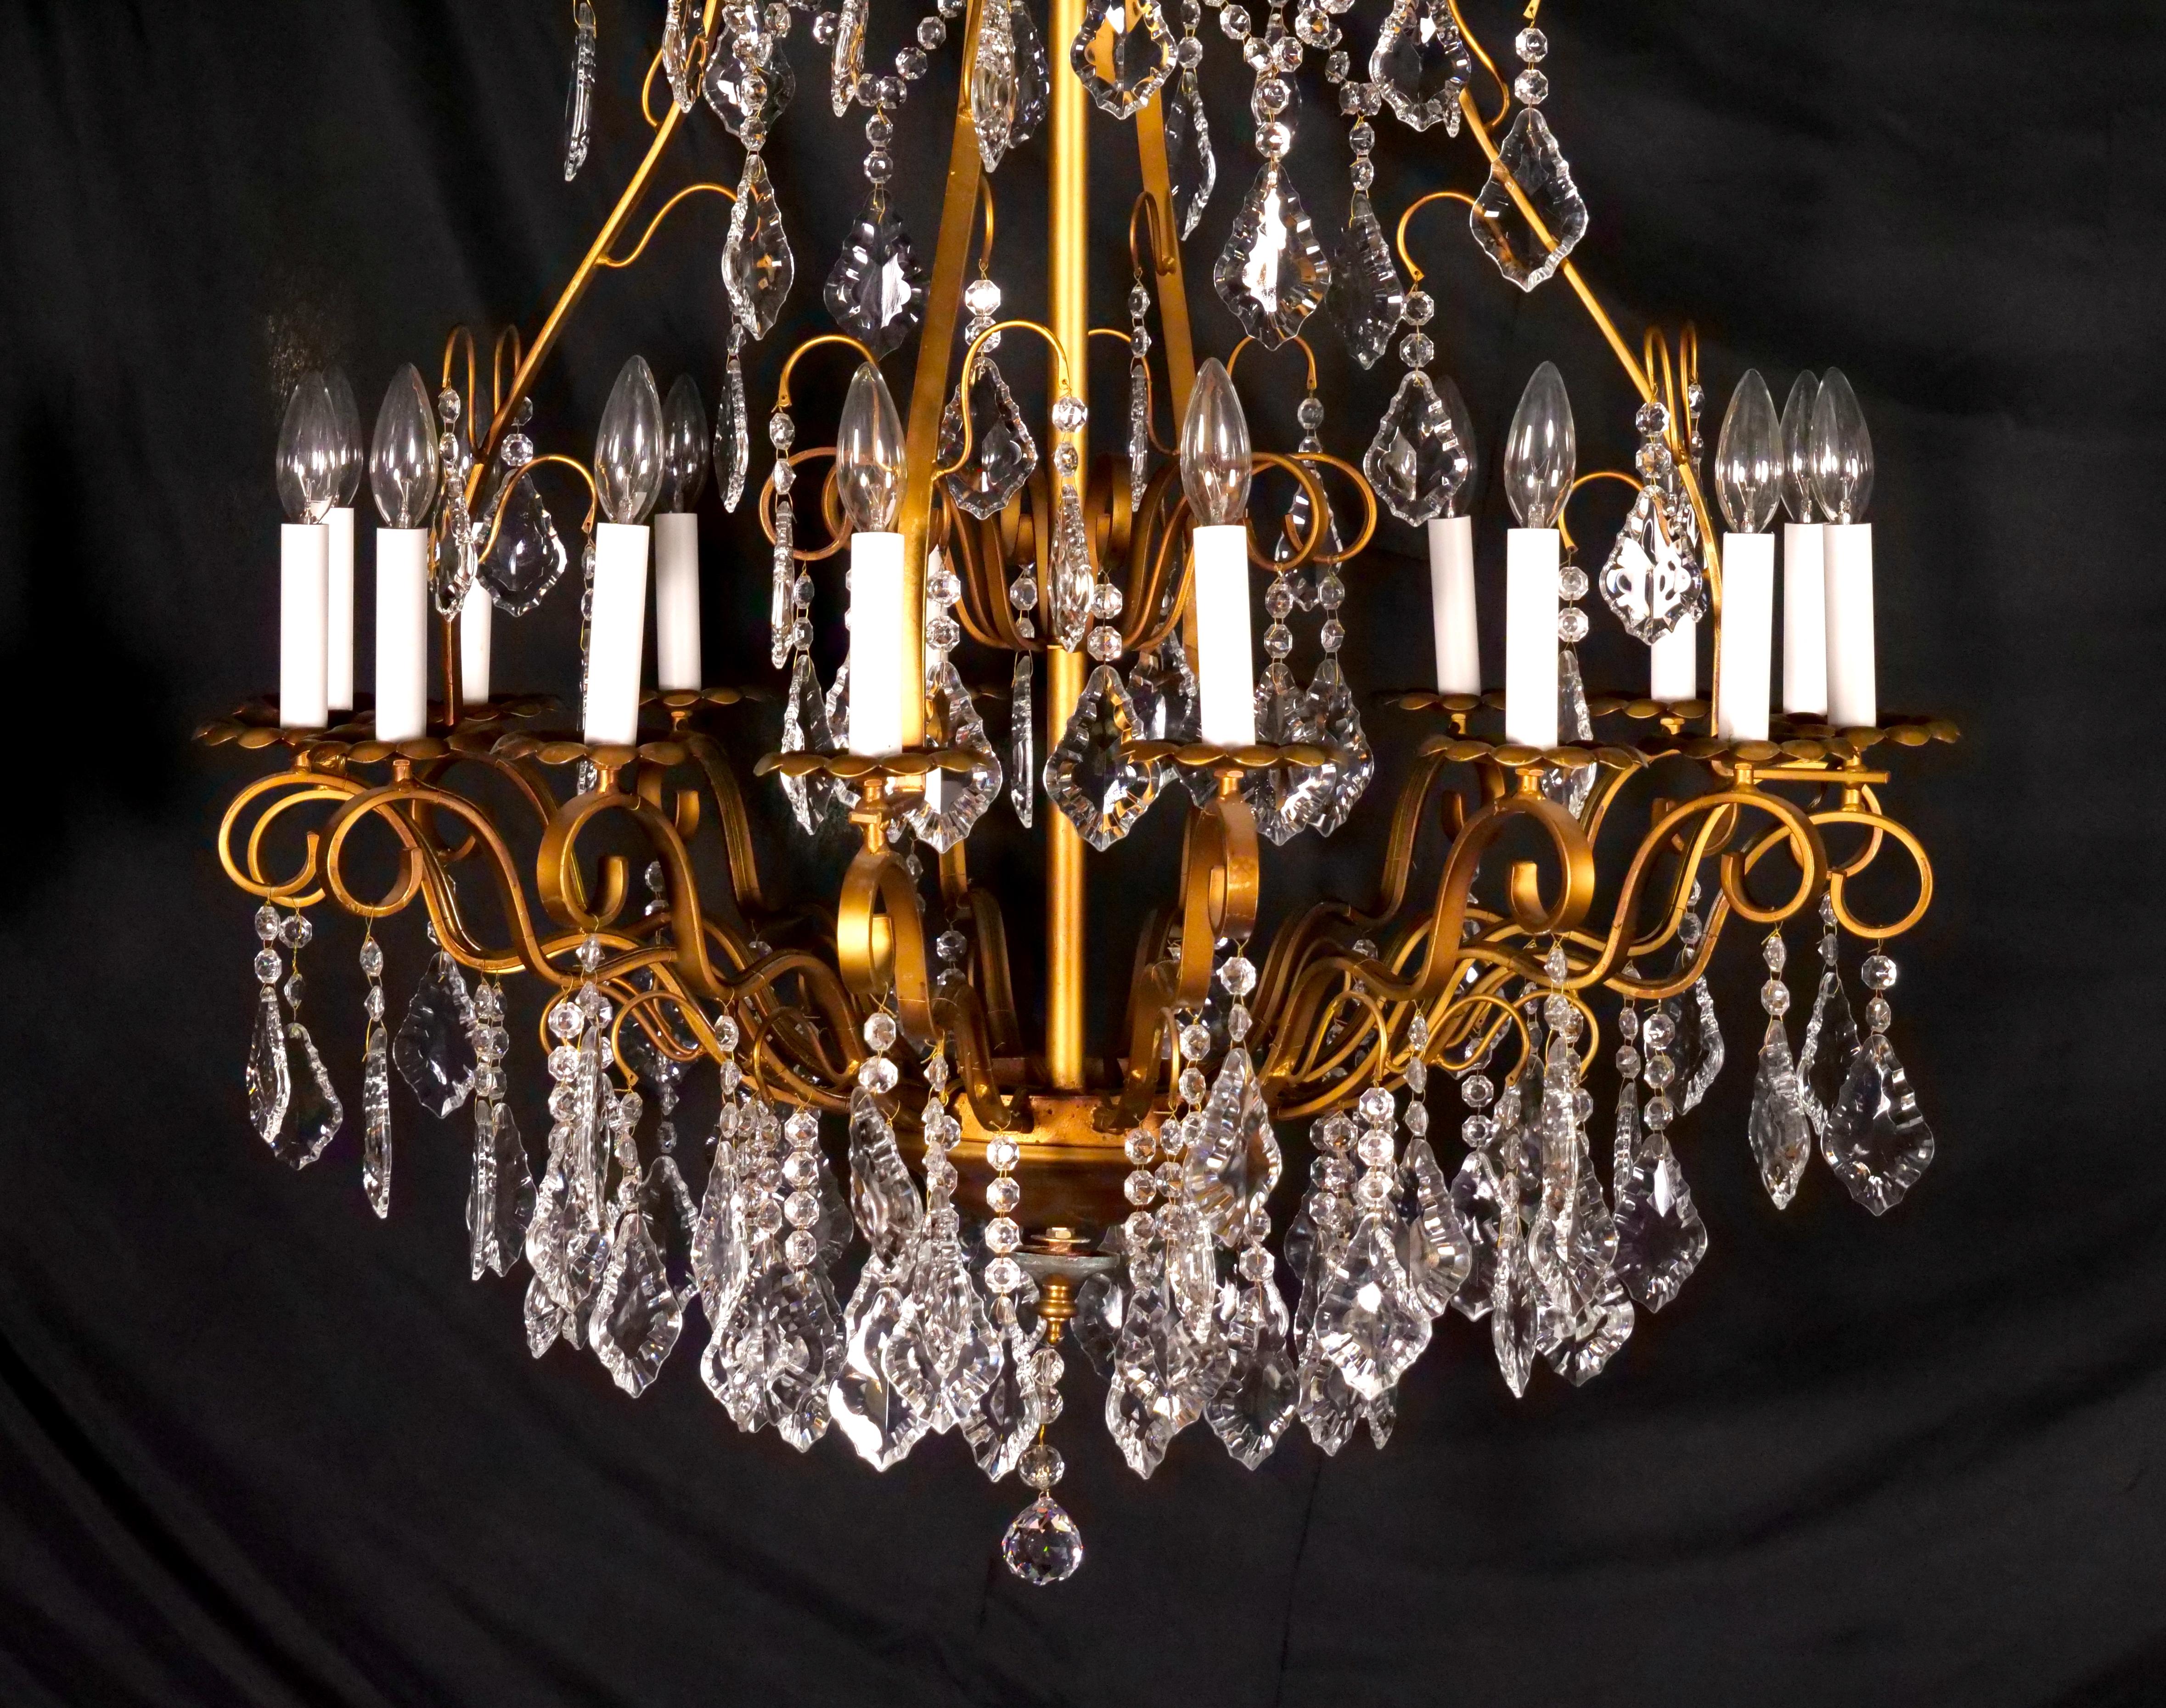 Elevate your space with the grandeur of this Impressive Early 20th Century Italian Gilt Brass Frame Sixteen-Light Cut Crystal Chandelier. This chandelier is a magnificent example of craftsmanship and design, meticulously combining gilt brass with